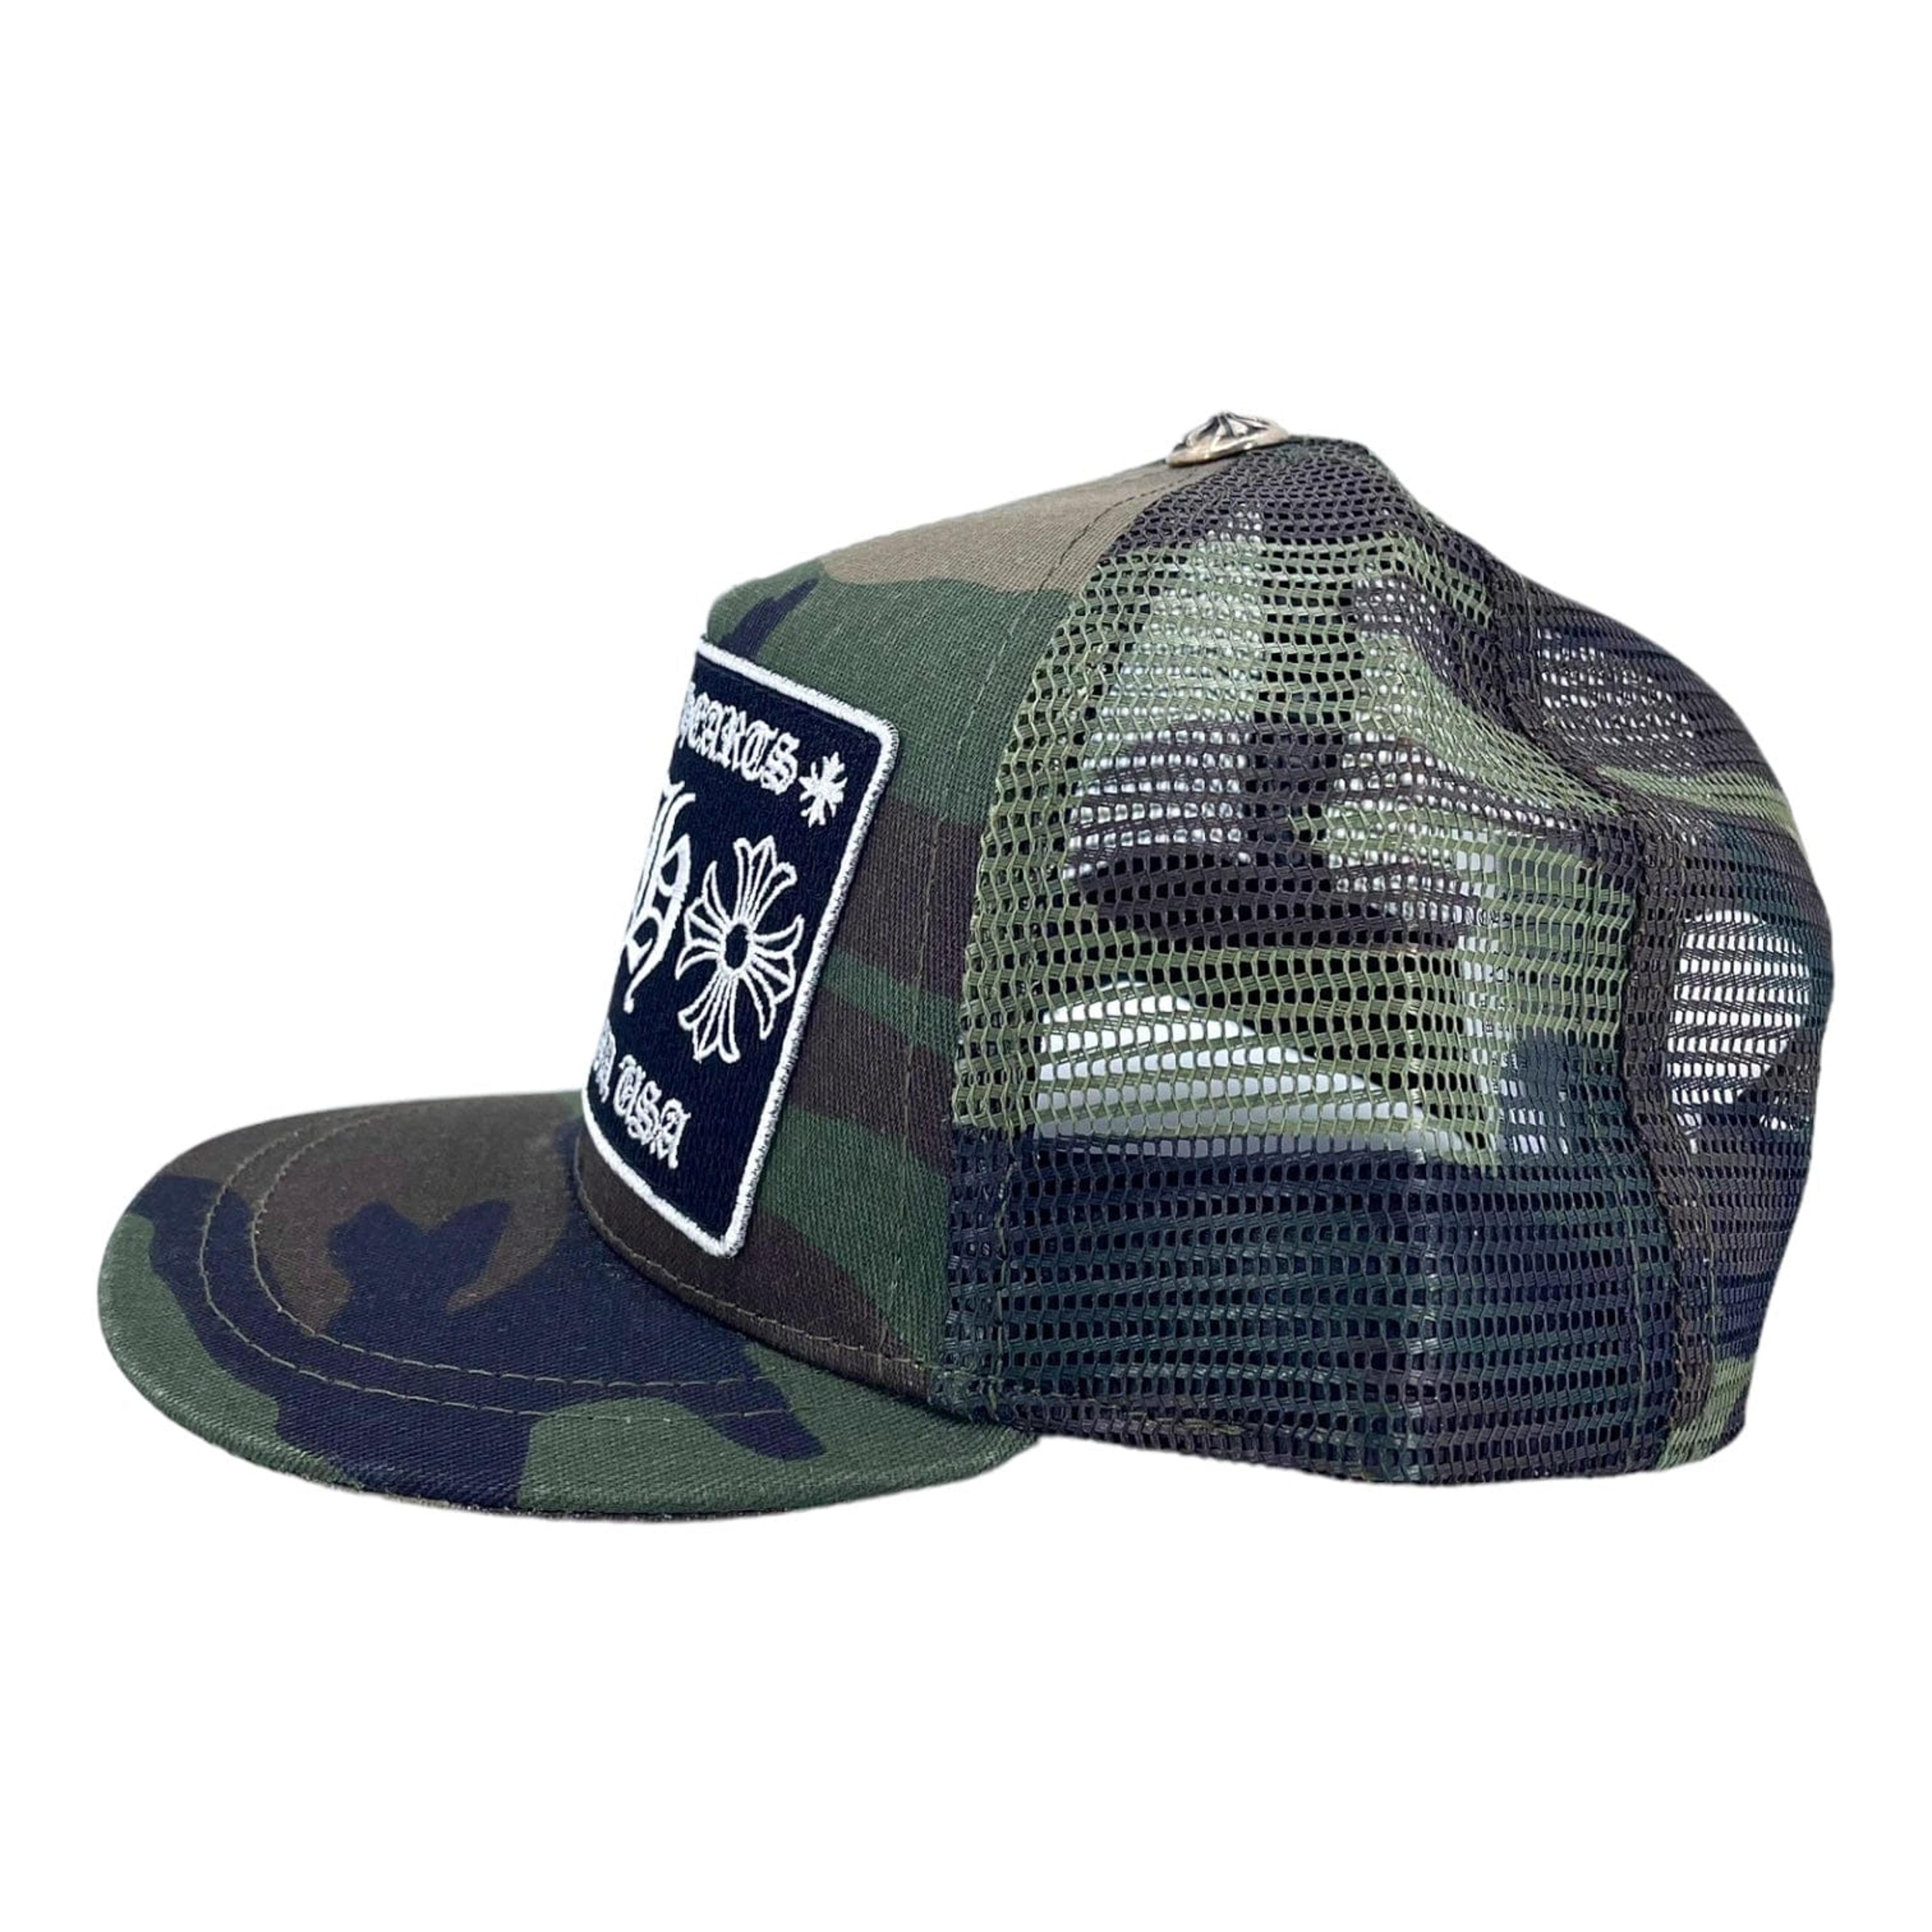 Alternate View 3 of Chrome Hearts CH Hollywood Trucker Hat Camo